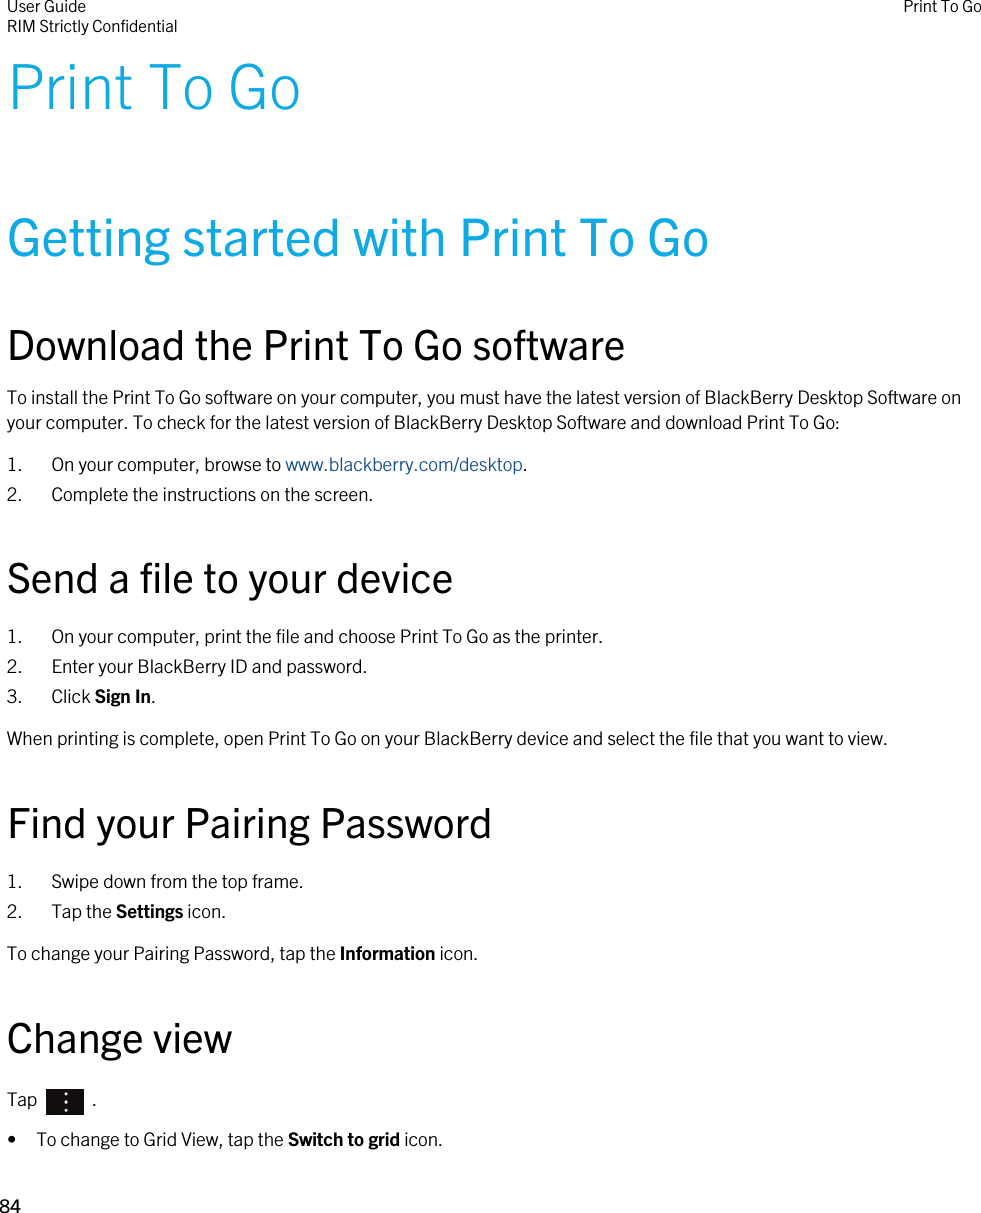 Print To GoGetting started with Print To GoDownload the Print To Go softwareTo install the Print To Go software on your computer, you must have the latest version of BlackBerry Desktop Software on your computer. To check for the latest version of BlackBerry Desktop Software and download Print To Go:1. On your computer, browse to www.blackberry.com/desktop.2. Complete the instructions on the screen.Send a file to your device1. On your computer, print the file and choose Print To Go as the printer.2. Enter your BlackBerry ID and password.3. Click Sign In.When printing is complete, open Print To Go on your BlackBerry device and select the file that you want to view.Find your Pairing Password1. Swipe down from the top frame.2. Tap the Settings icon.To change your Pairing Password, tap the Information icon.Change viewTap    .• To change to Grid View, tap the Switch to grid icon.User GuideRIM Strictly ConfidentialPrint To Go84 